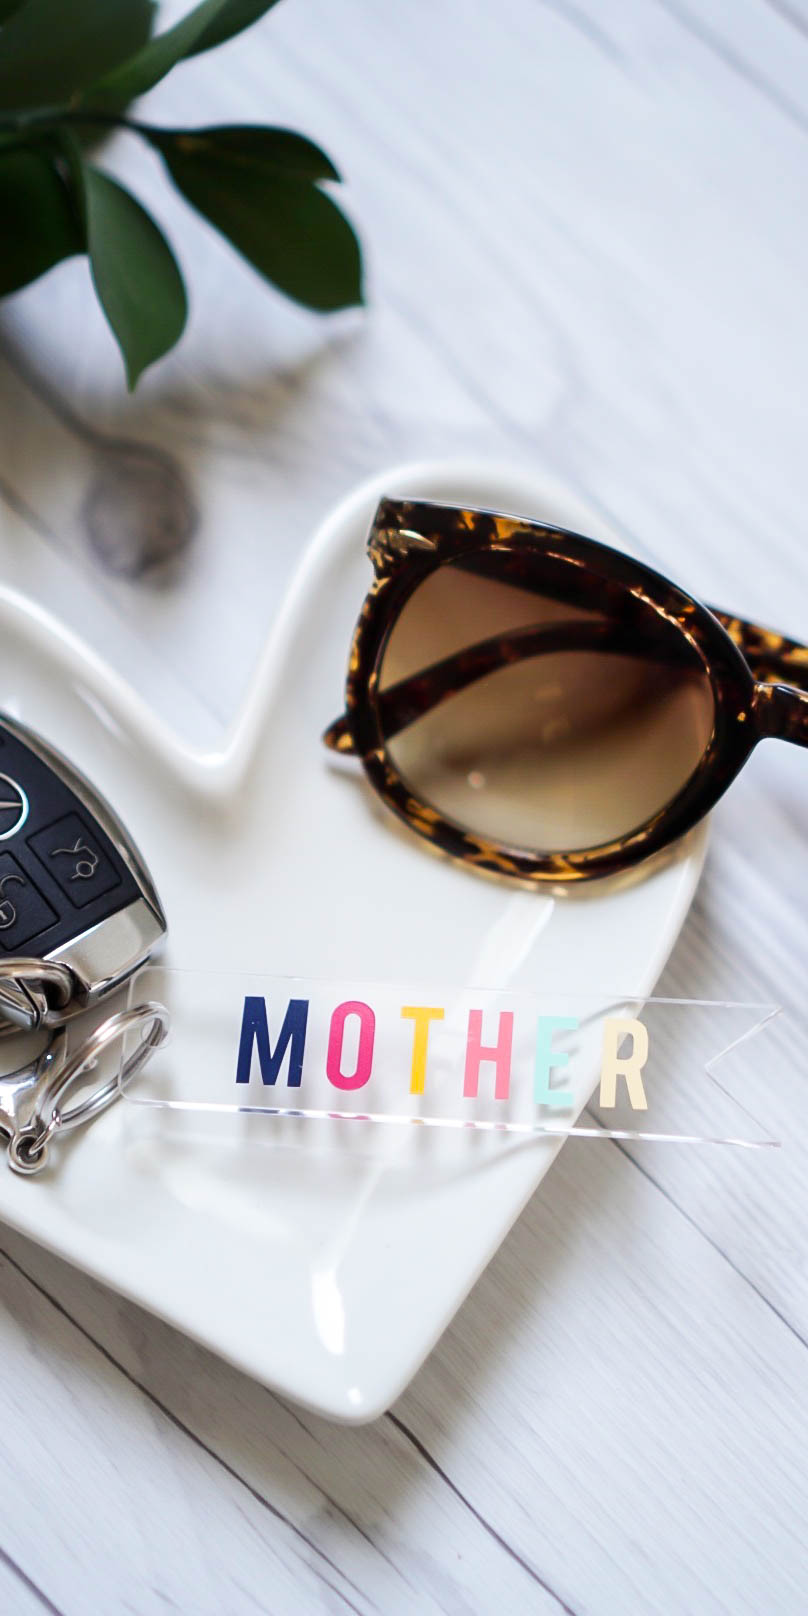 Mother’s Day Gift Idea: Acrylic Keychain With Adhesive Vinyl